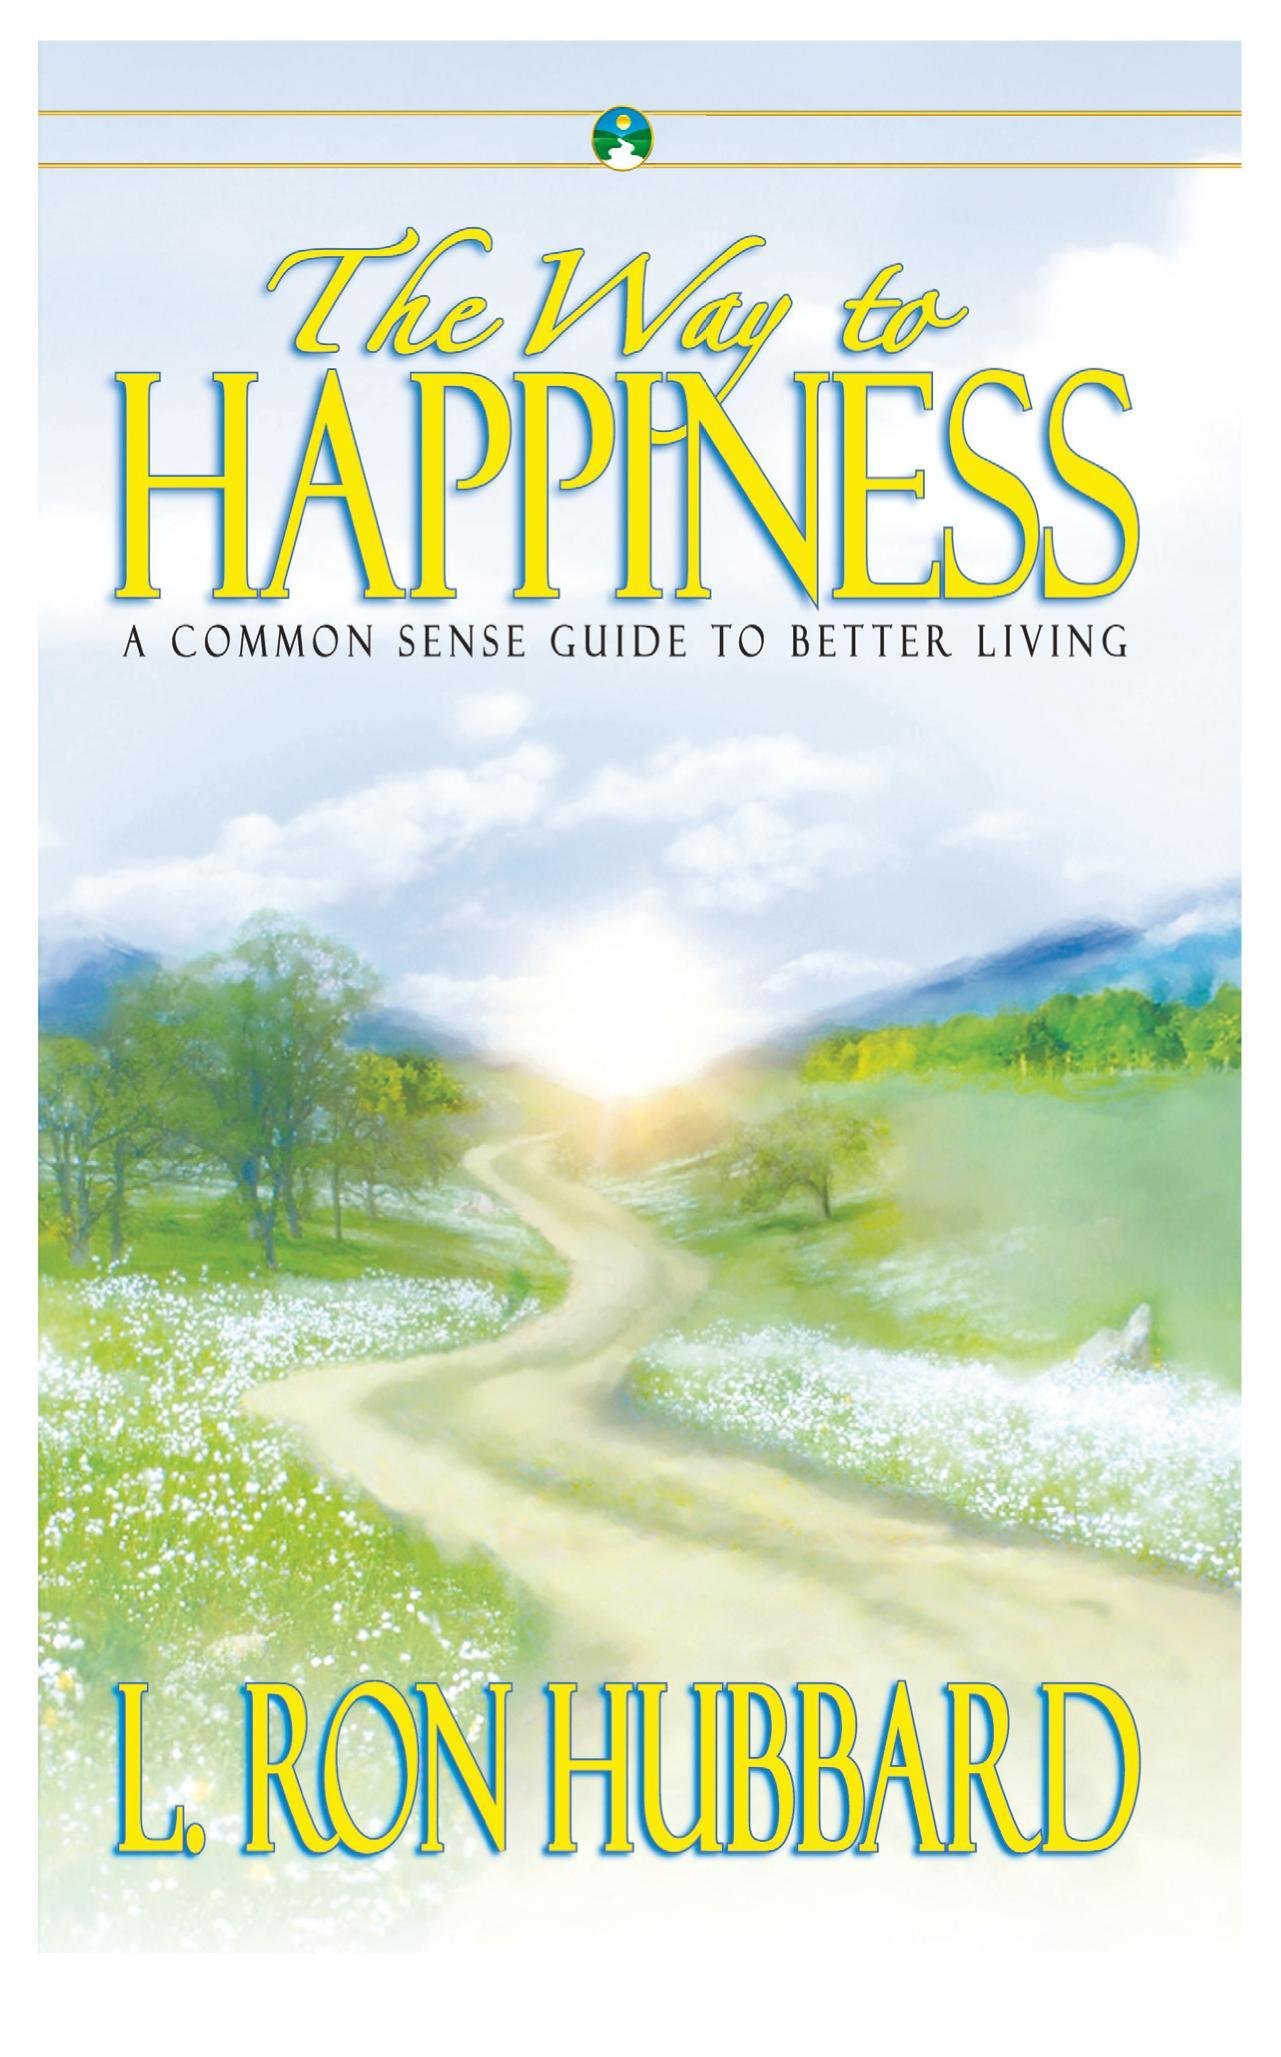 The Way To Happiness (New Edition)